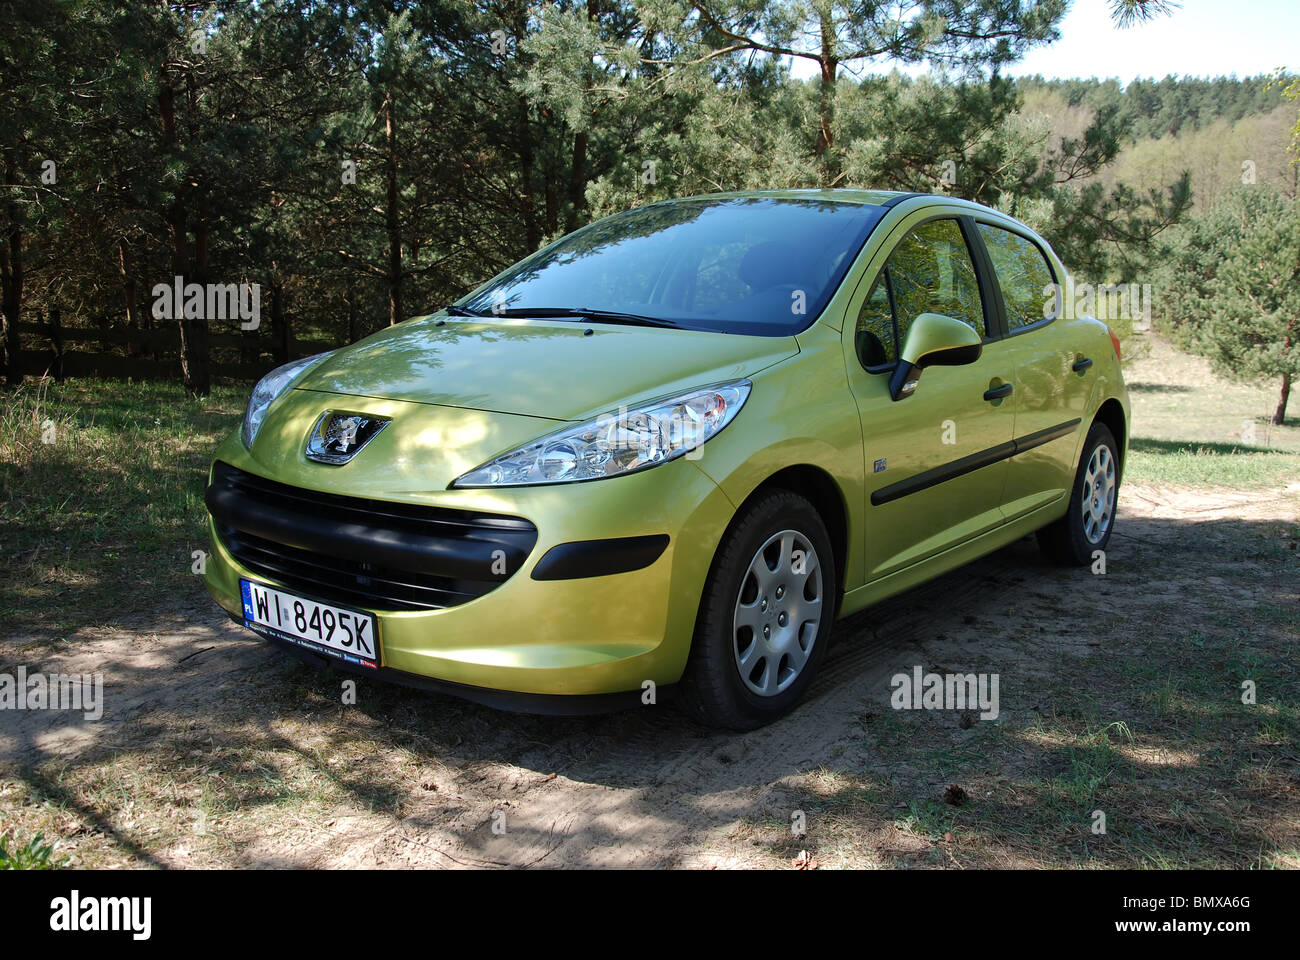 Peugeot 207 1.4 - 2009 (FL) - French popular subcompact city car